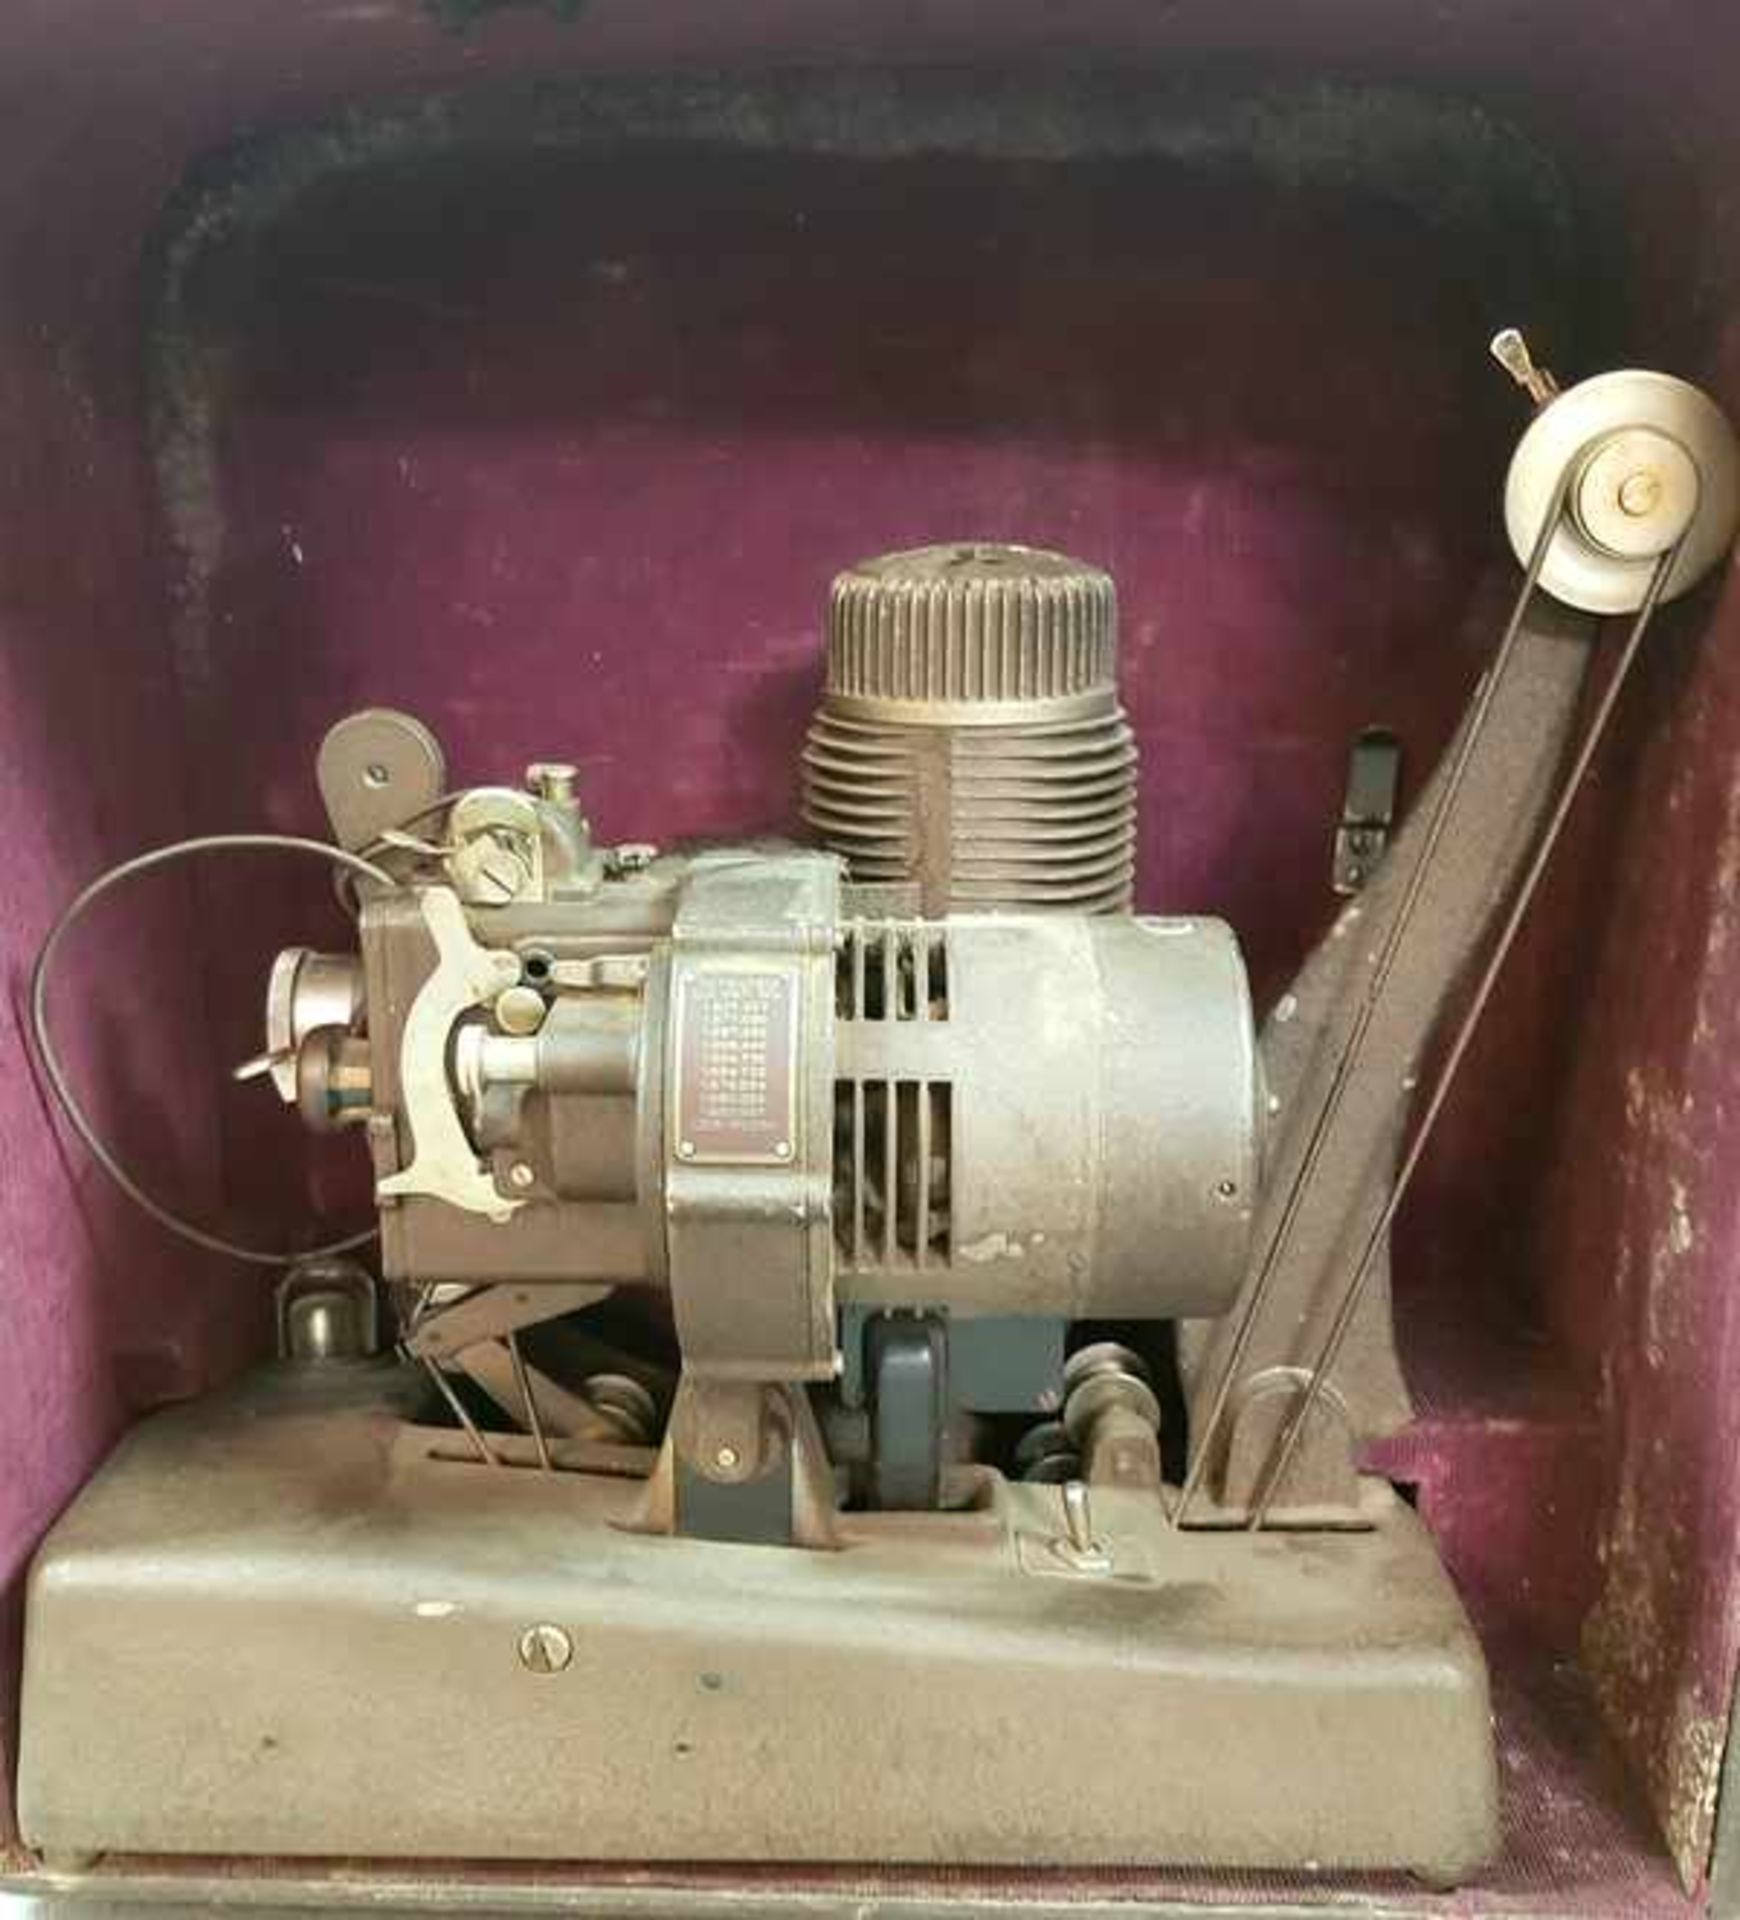 (Curiosa) Bell & Howell projector